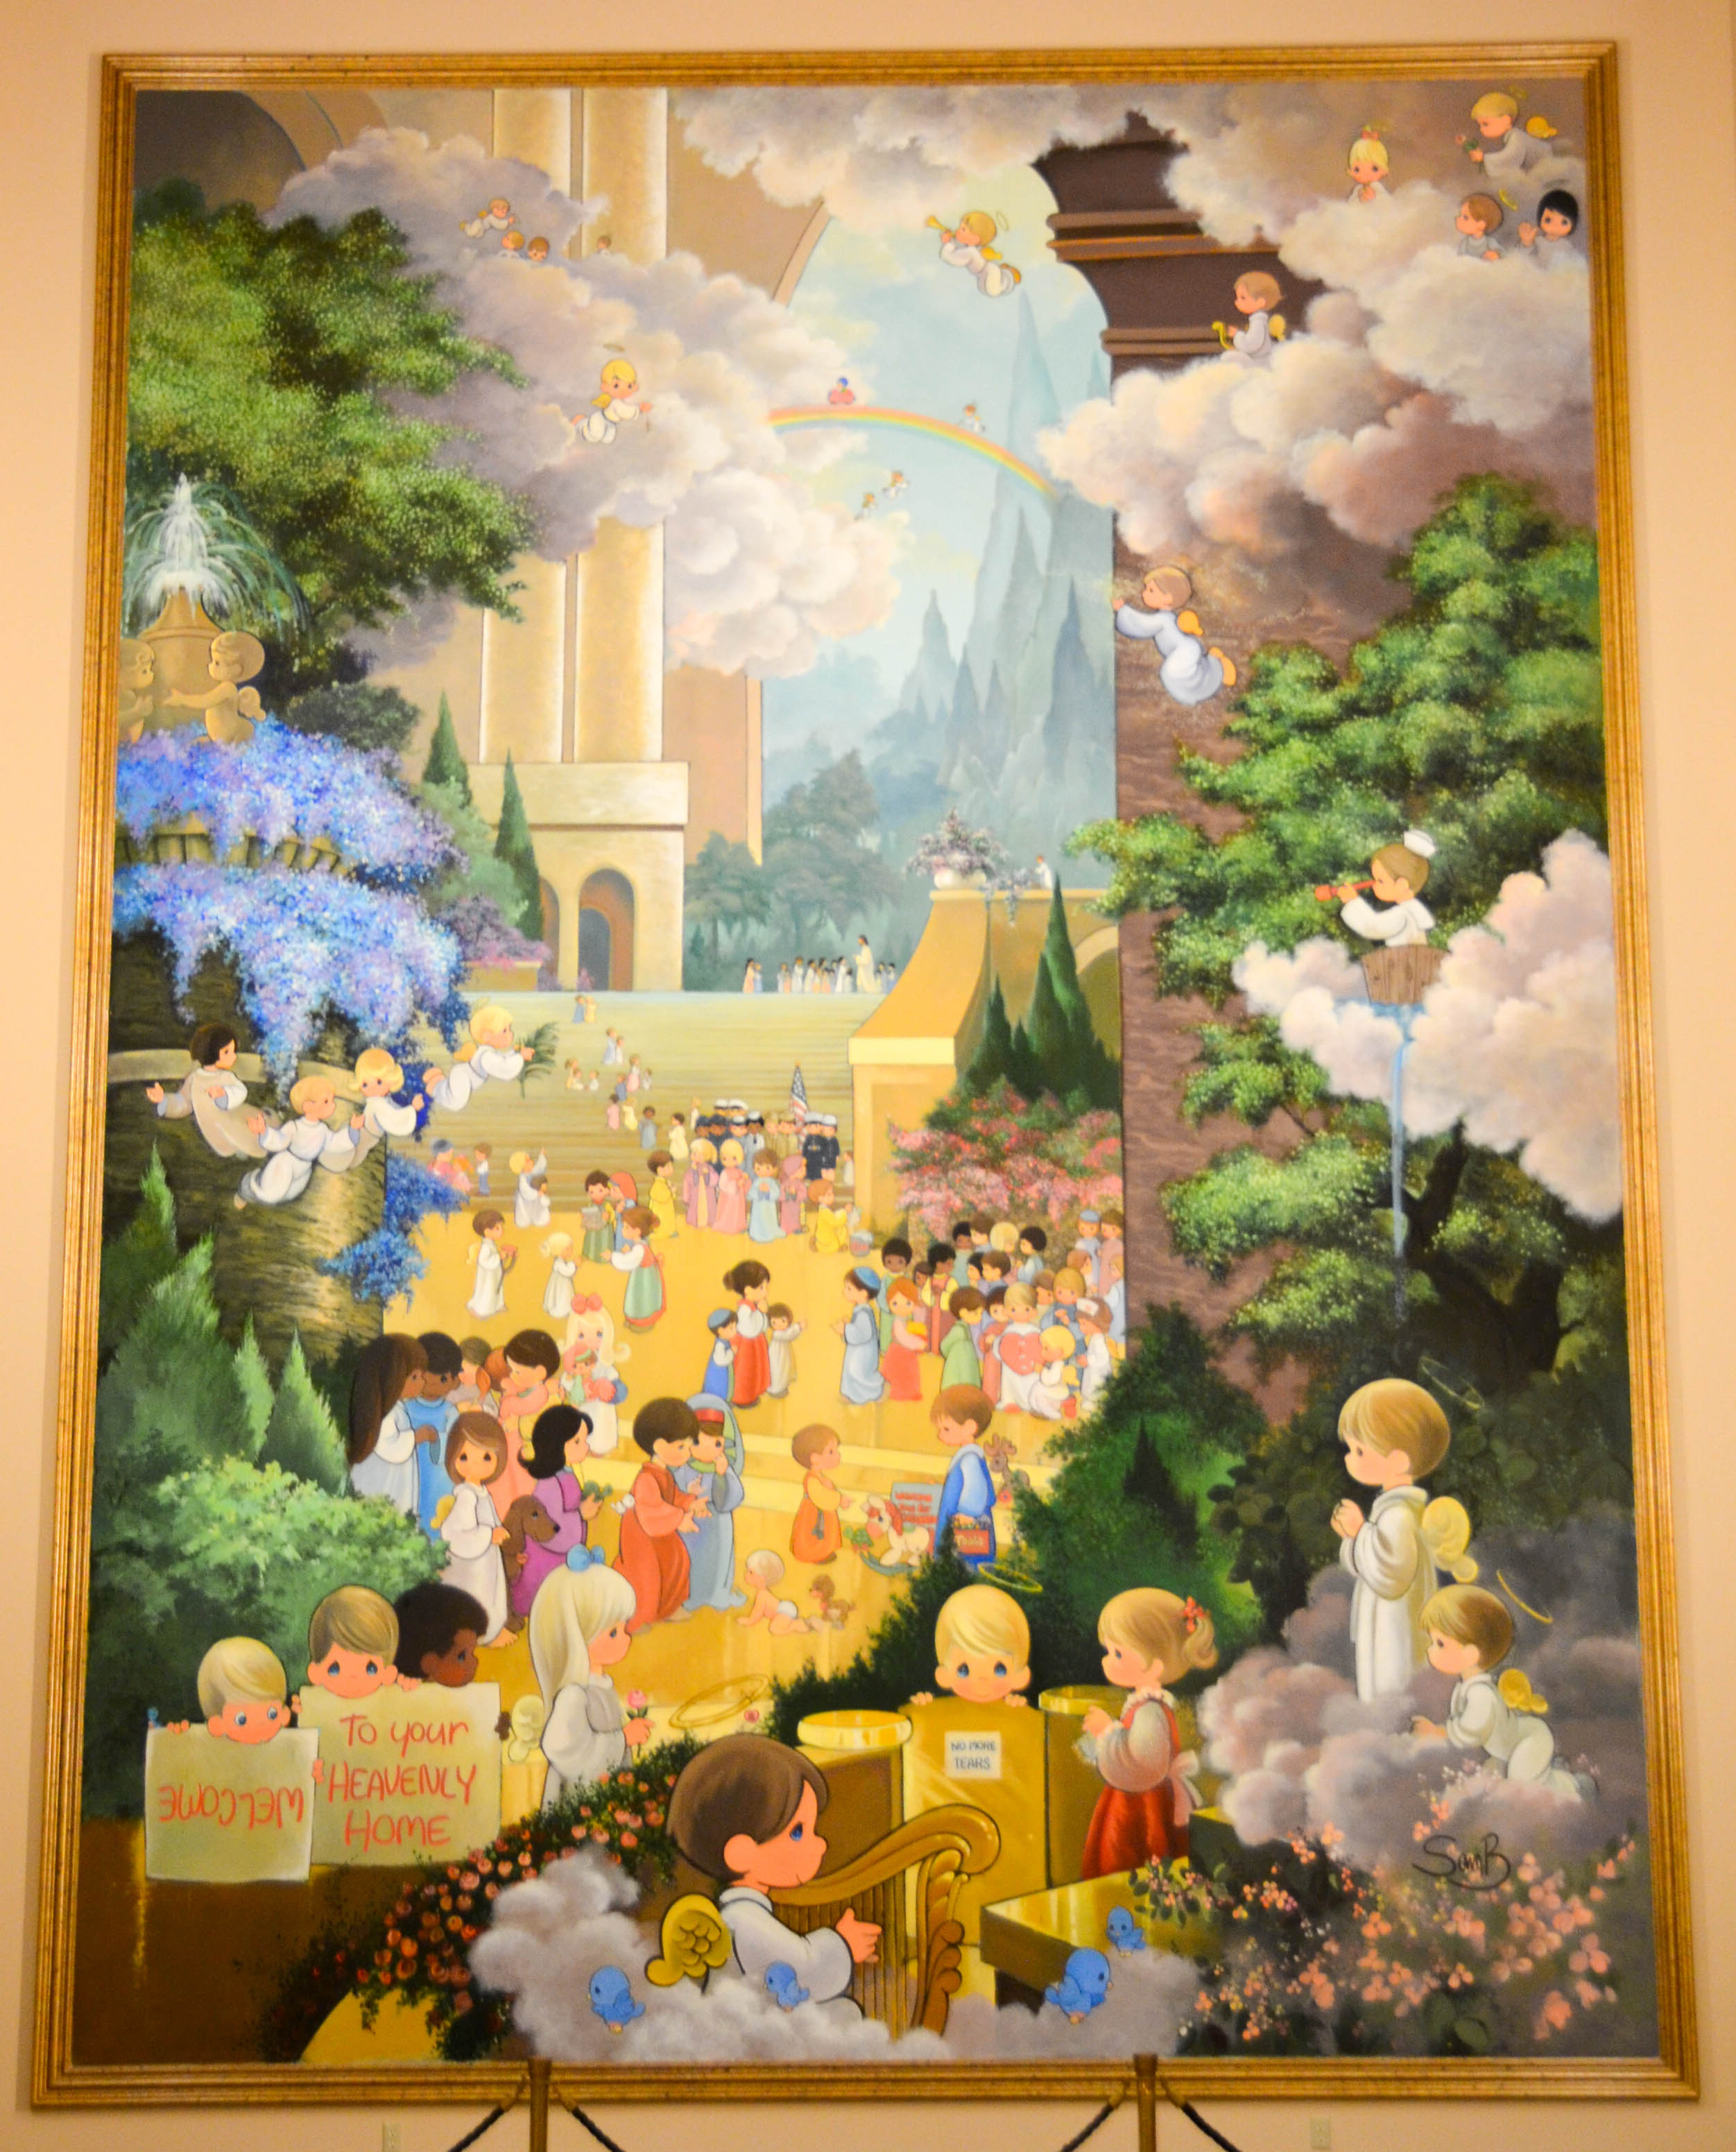 The main painting shows children arriving in heaven.